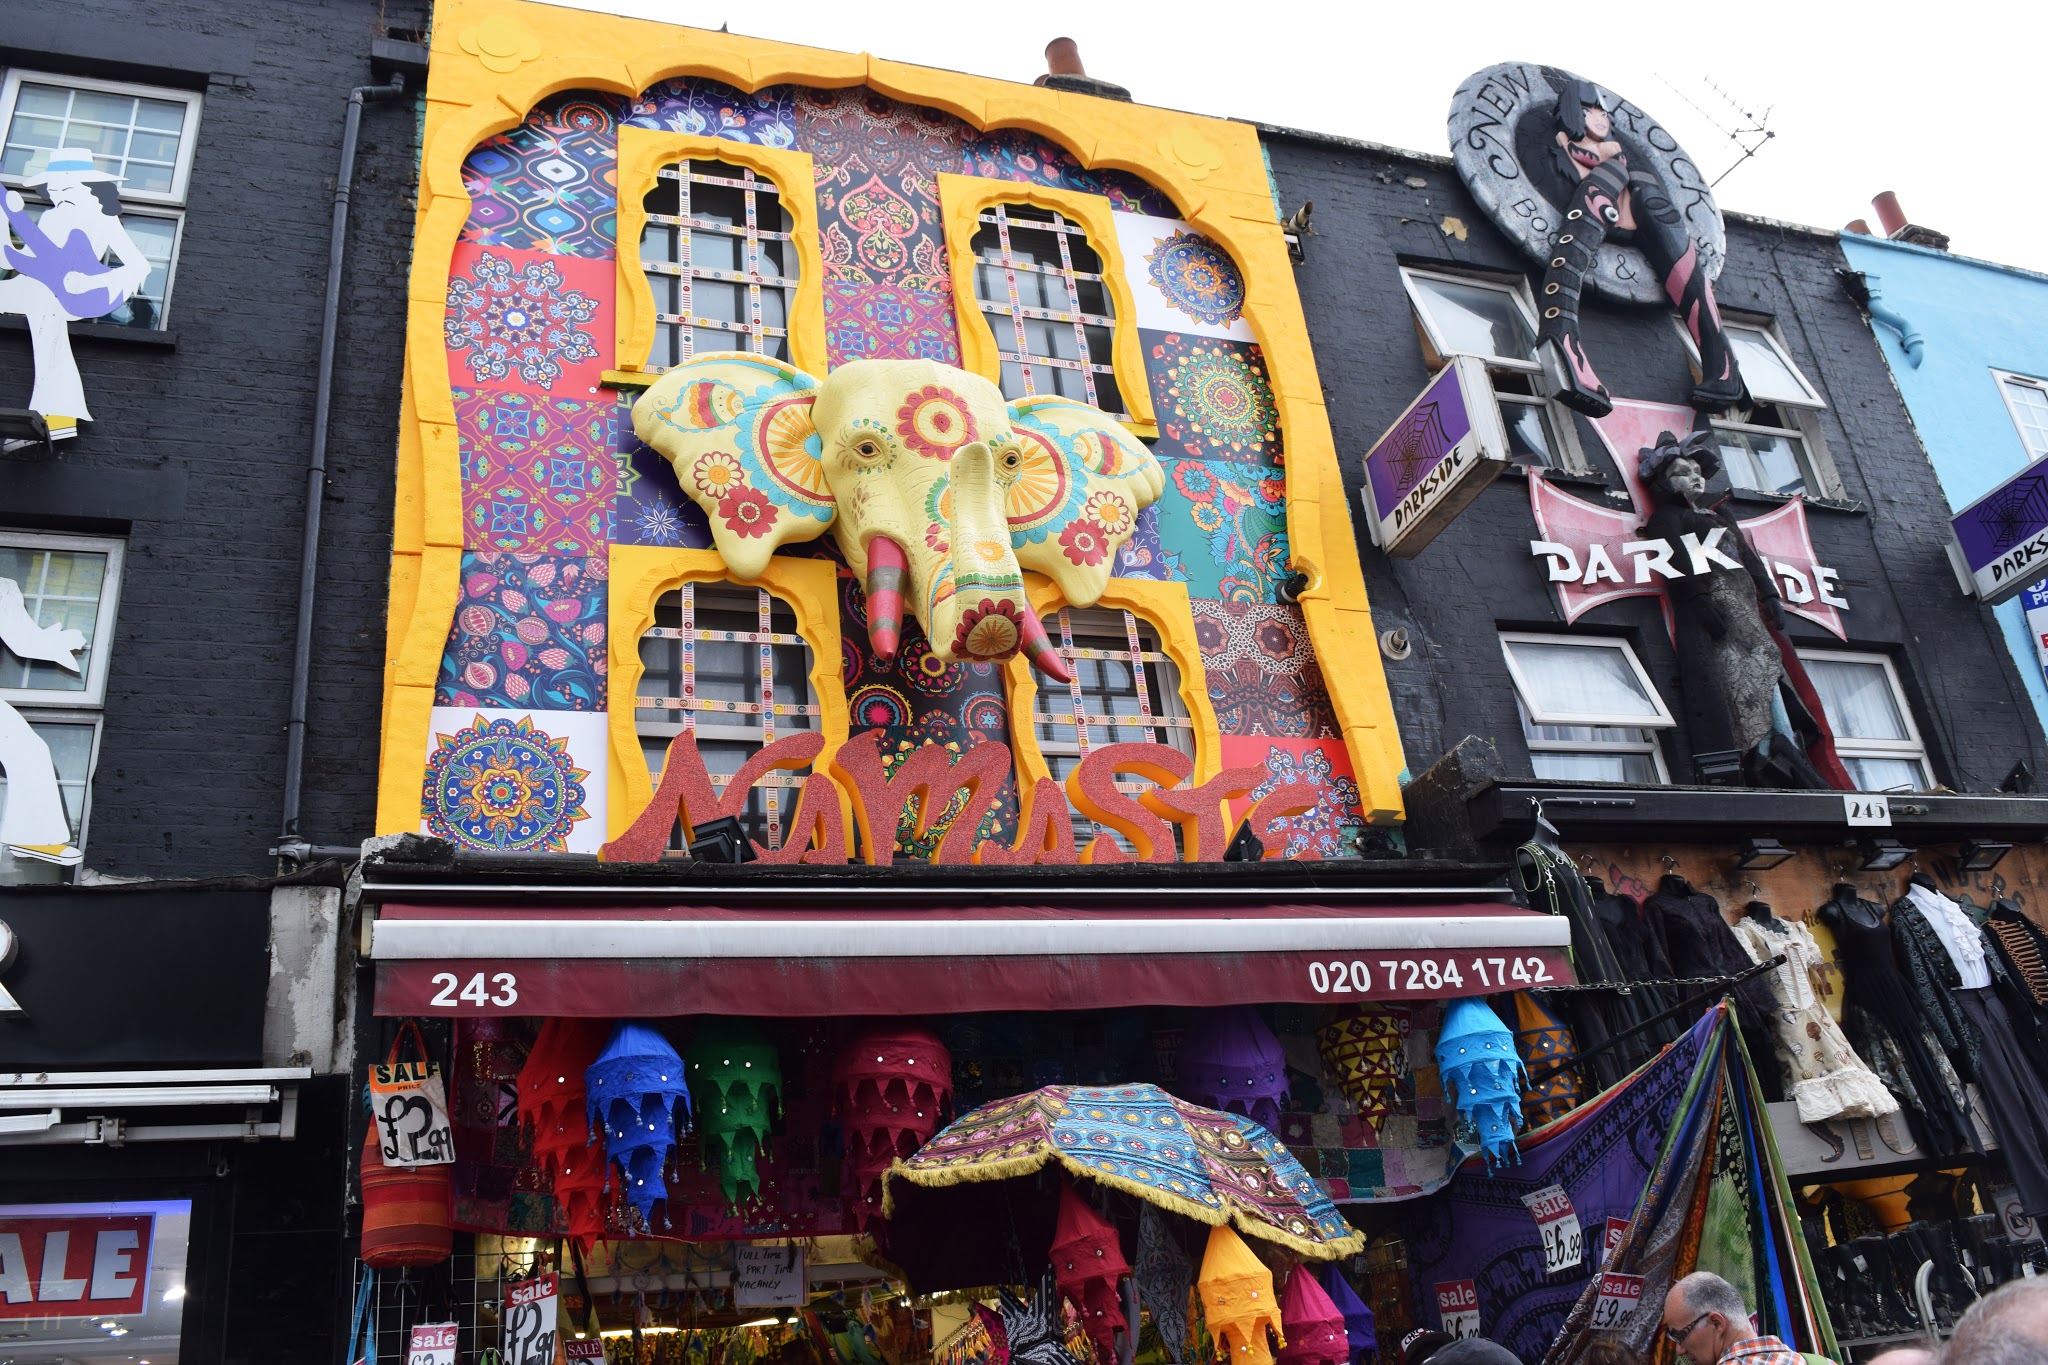 One of the many decorated shop fronts in Camden Town